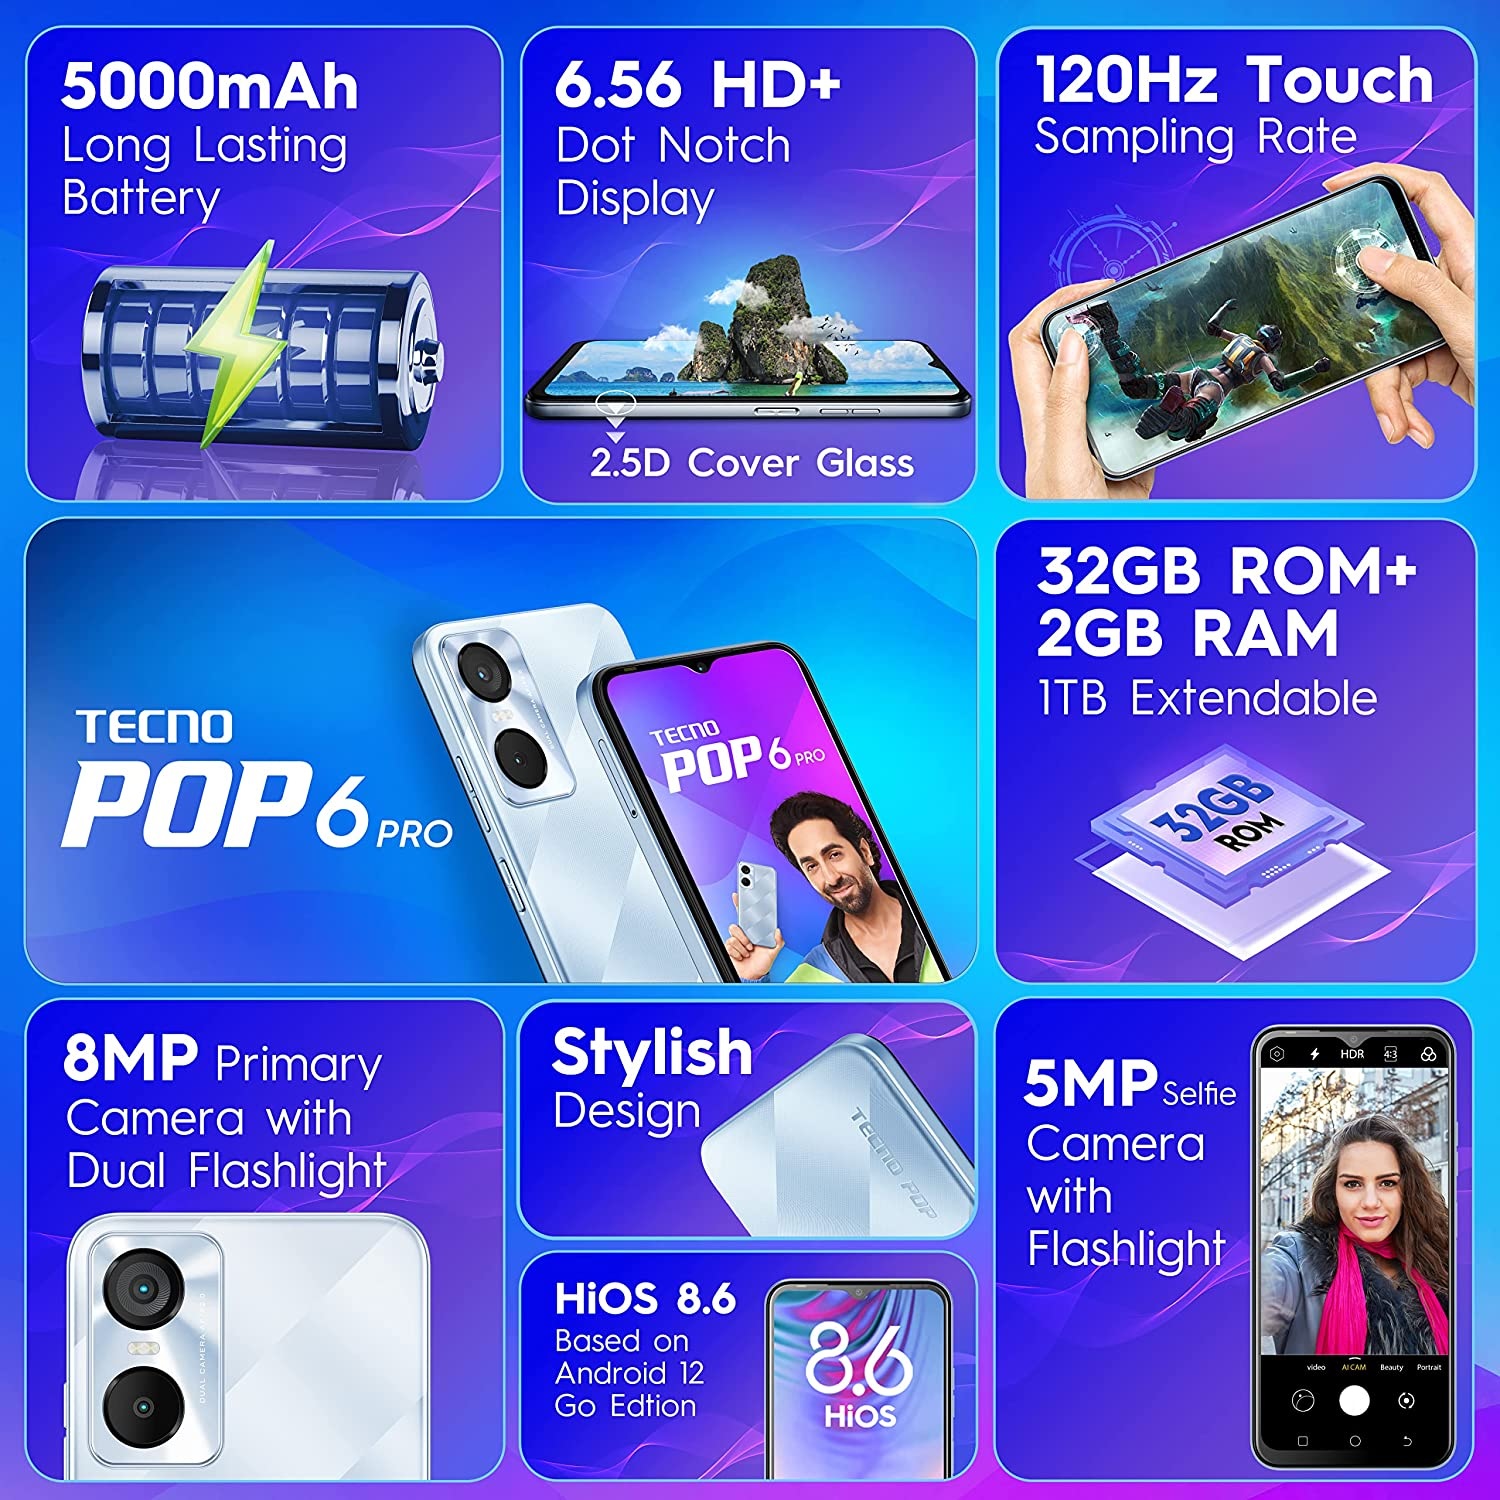 TECNO POP 6 Pro entry-level smartphone launches in India — TechANDROIDS